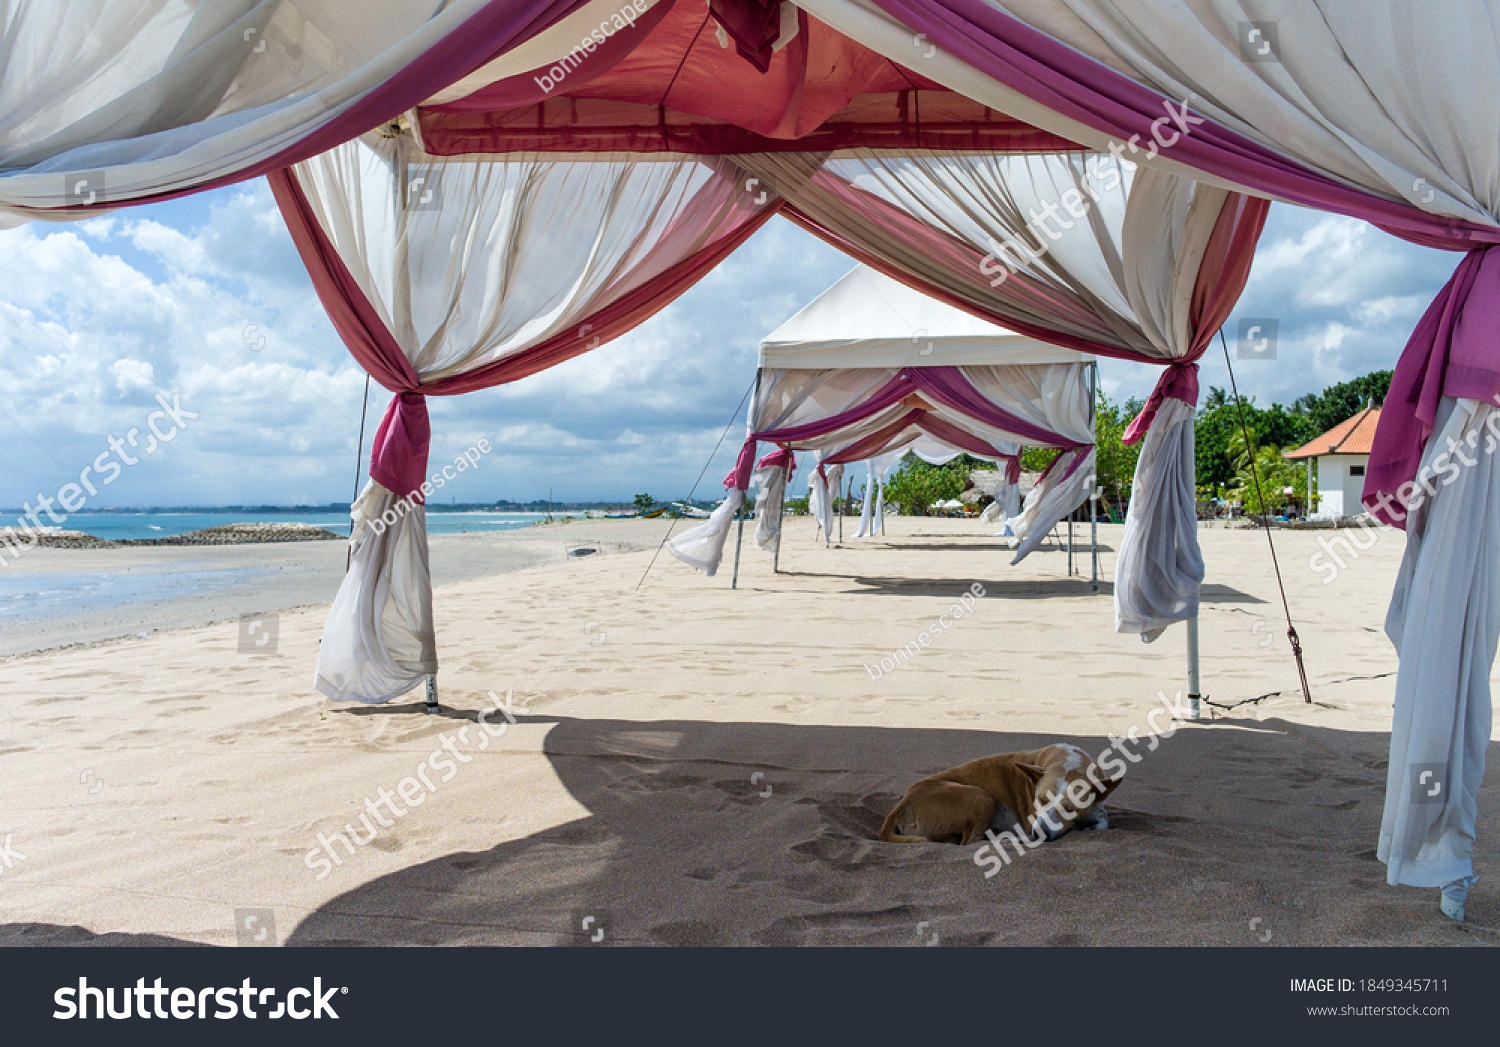 Poor estray dog sleeping in the sand in the leafy bower of a luxury pavilion at Bali beach #1849345711